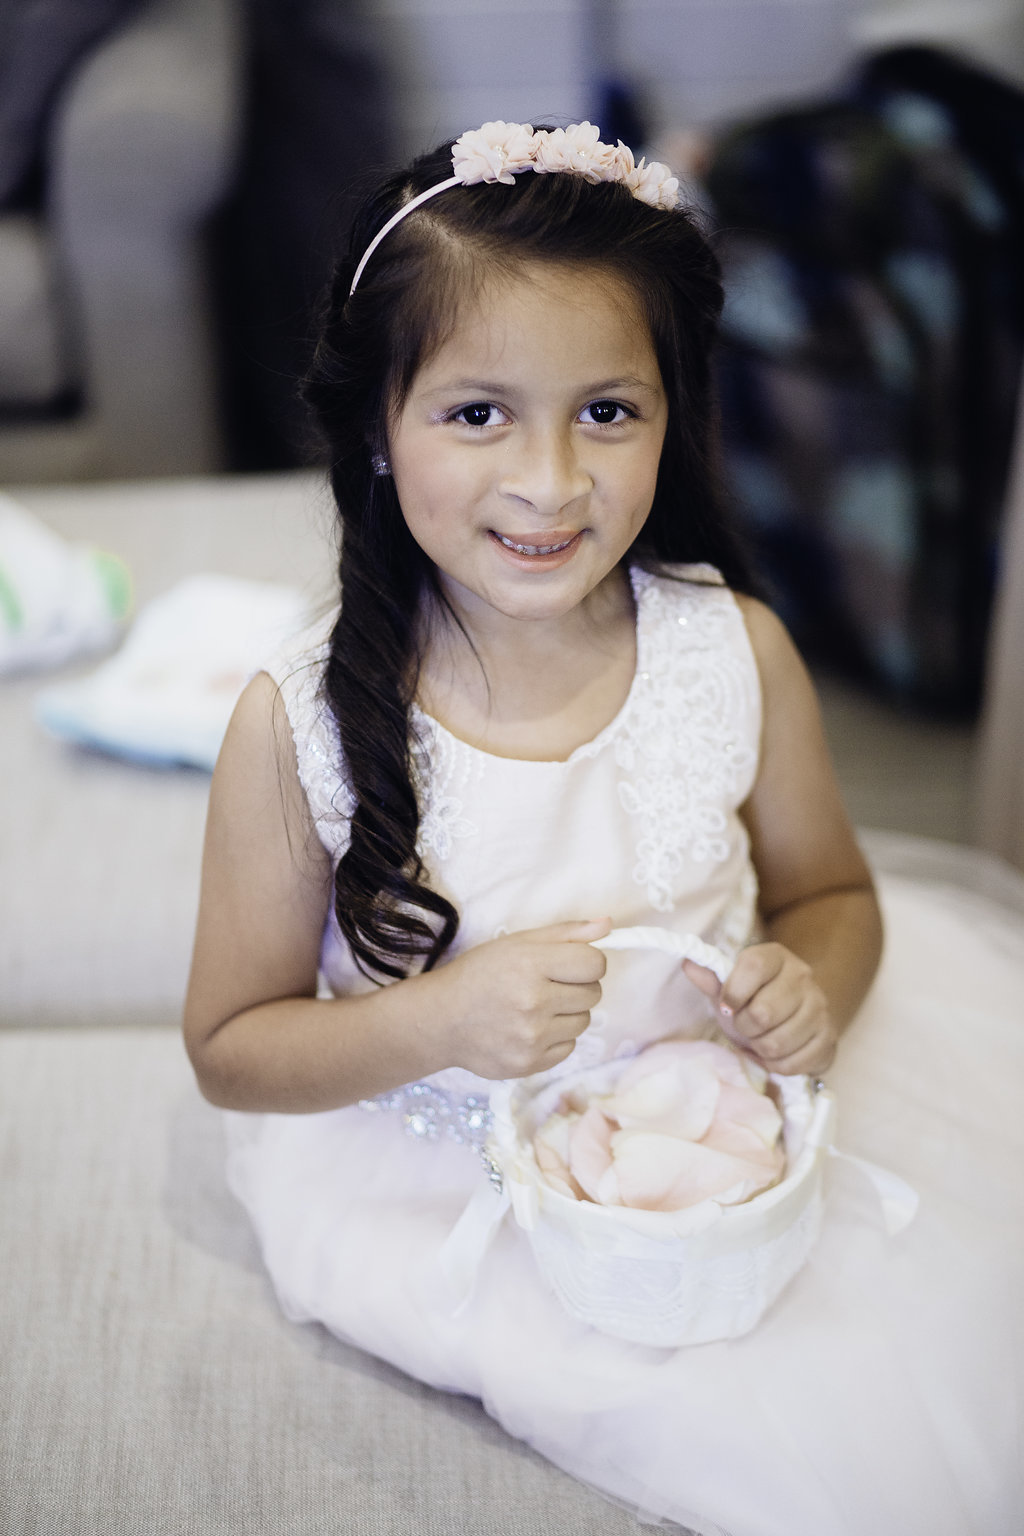 Wedding Photograph Of a Girl Holding a Small Basket Los Angeles